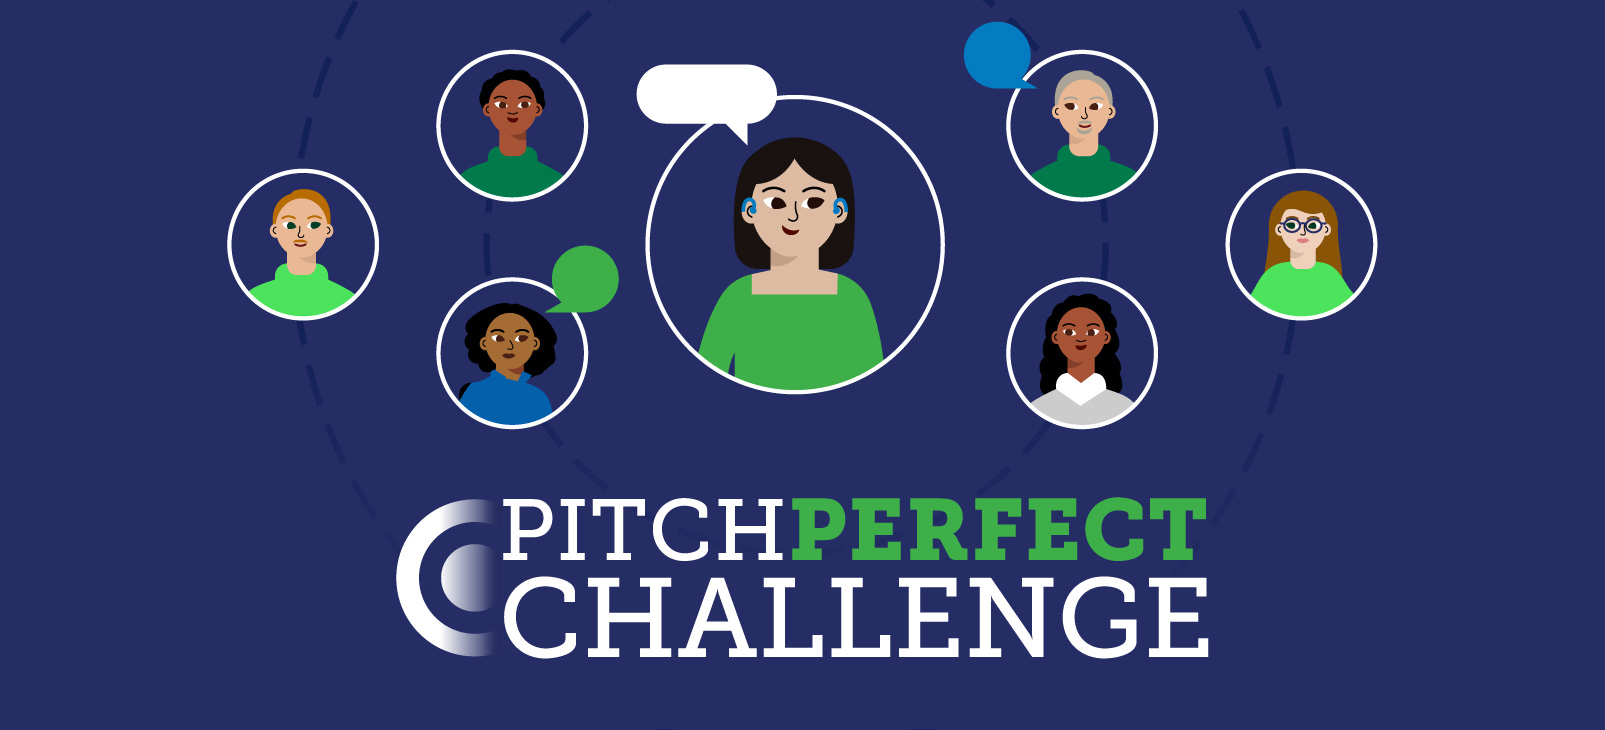 Pitch Perfect Challenge. Geometric illustration of seven individuals with one Deaf person in the middle pitching their business.